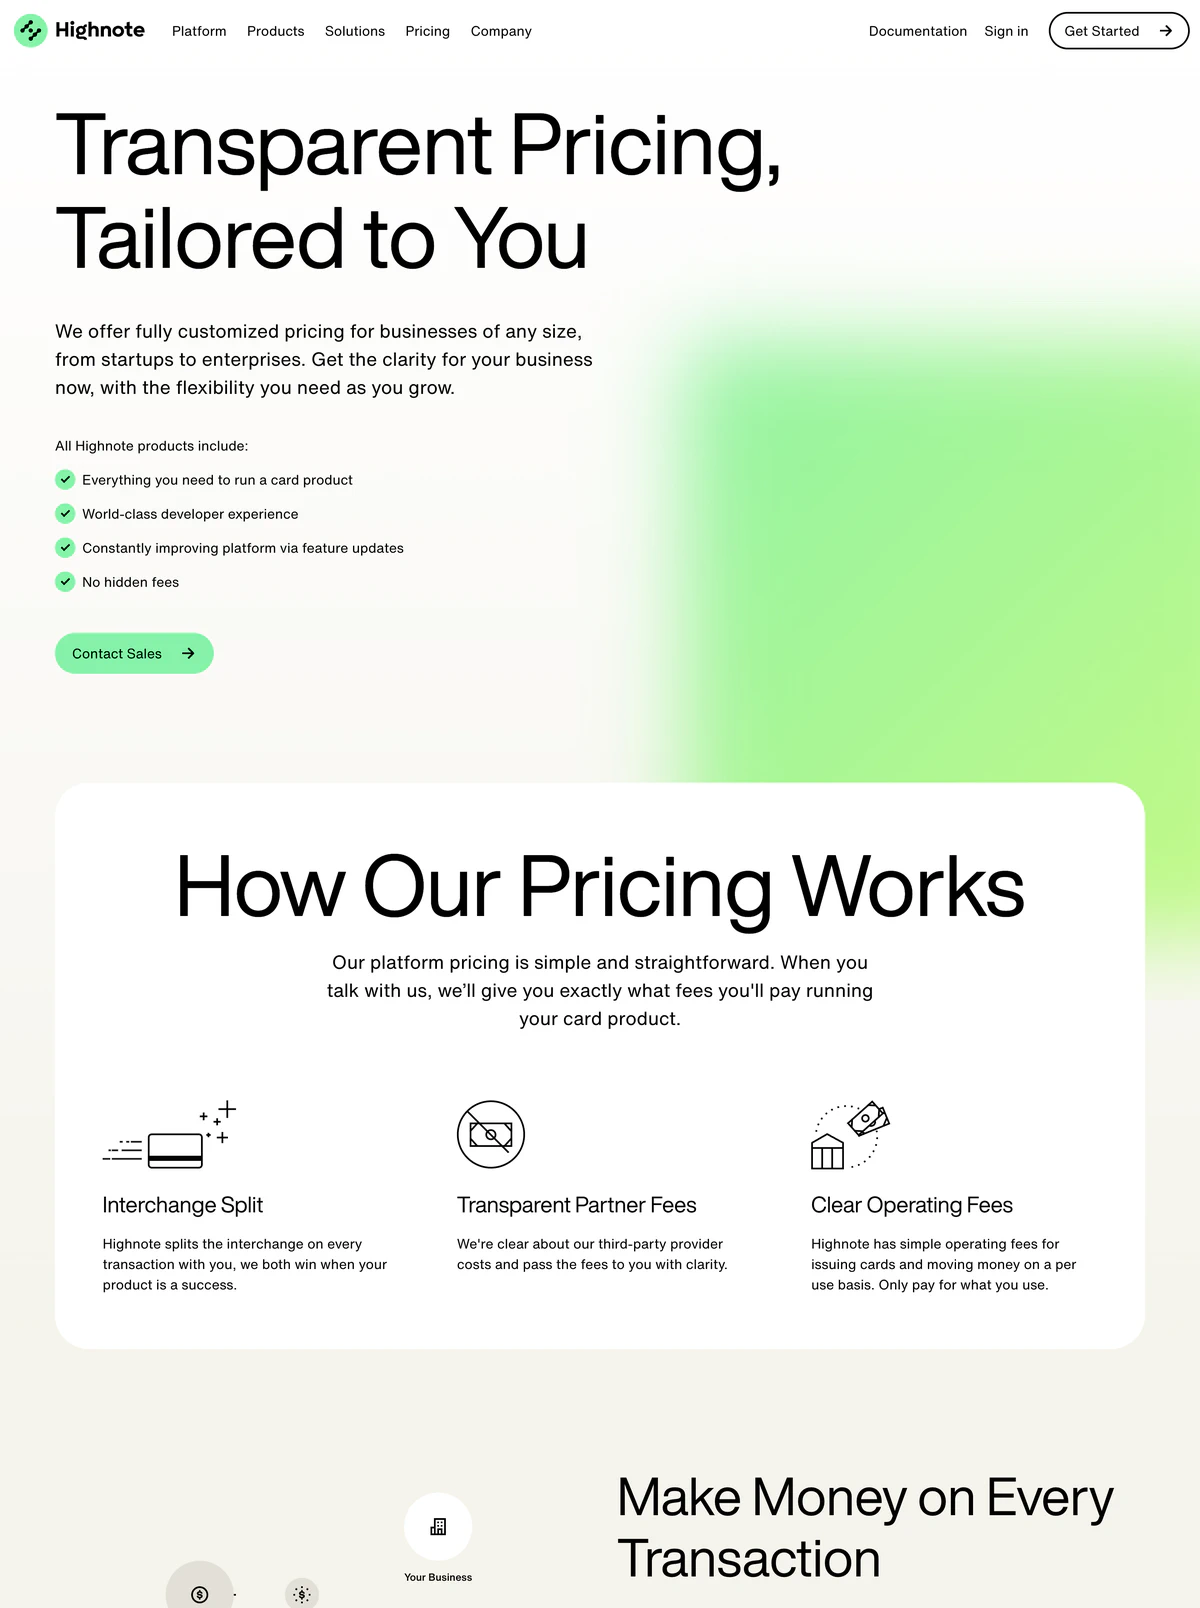 Pricing Page Example Highnote